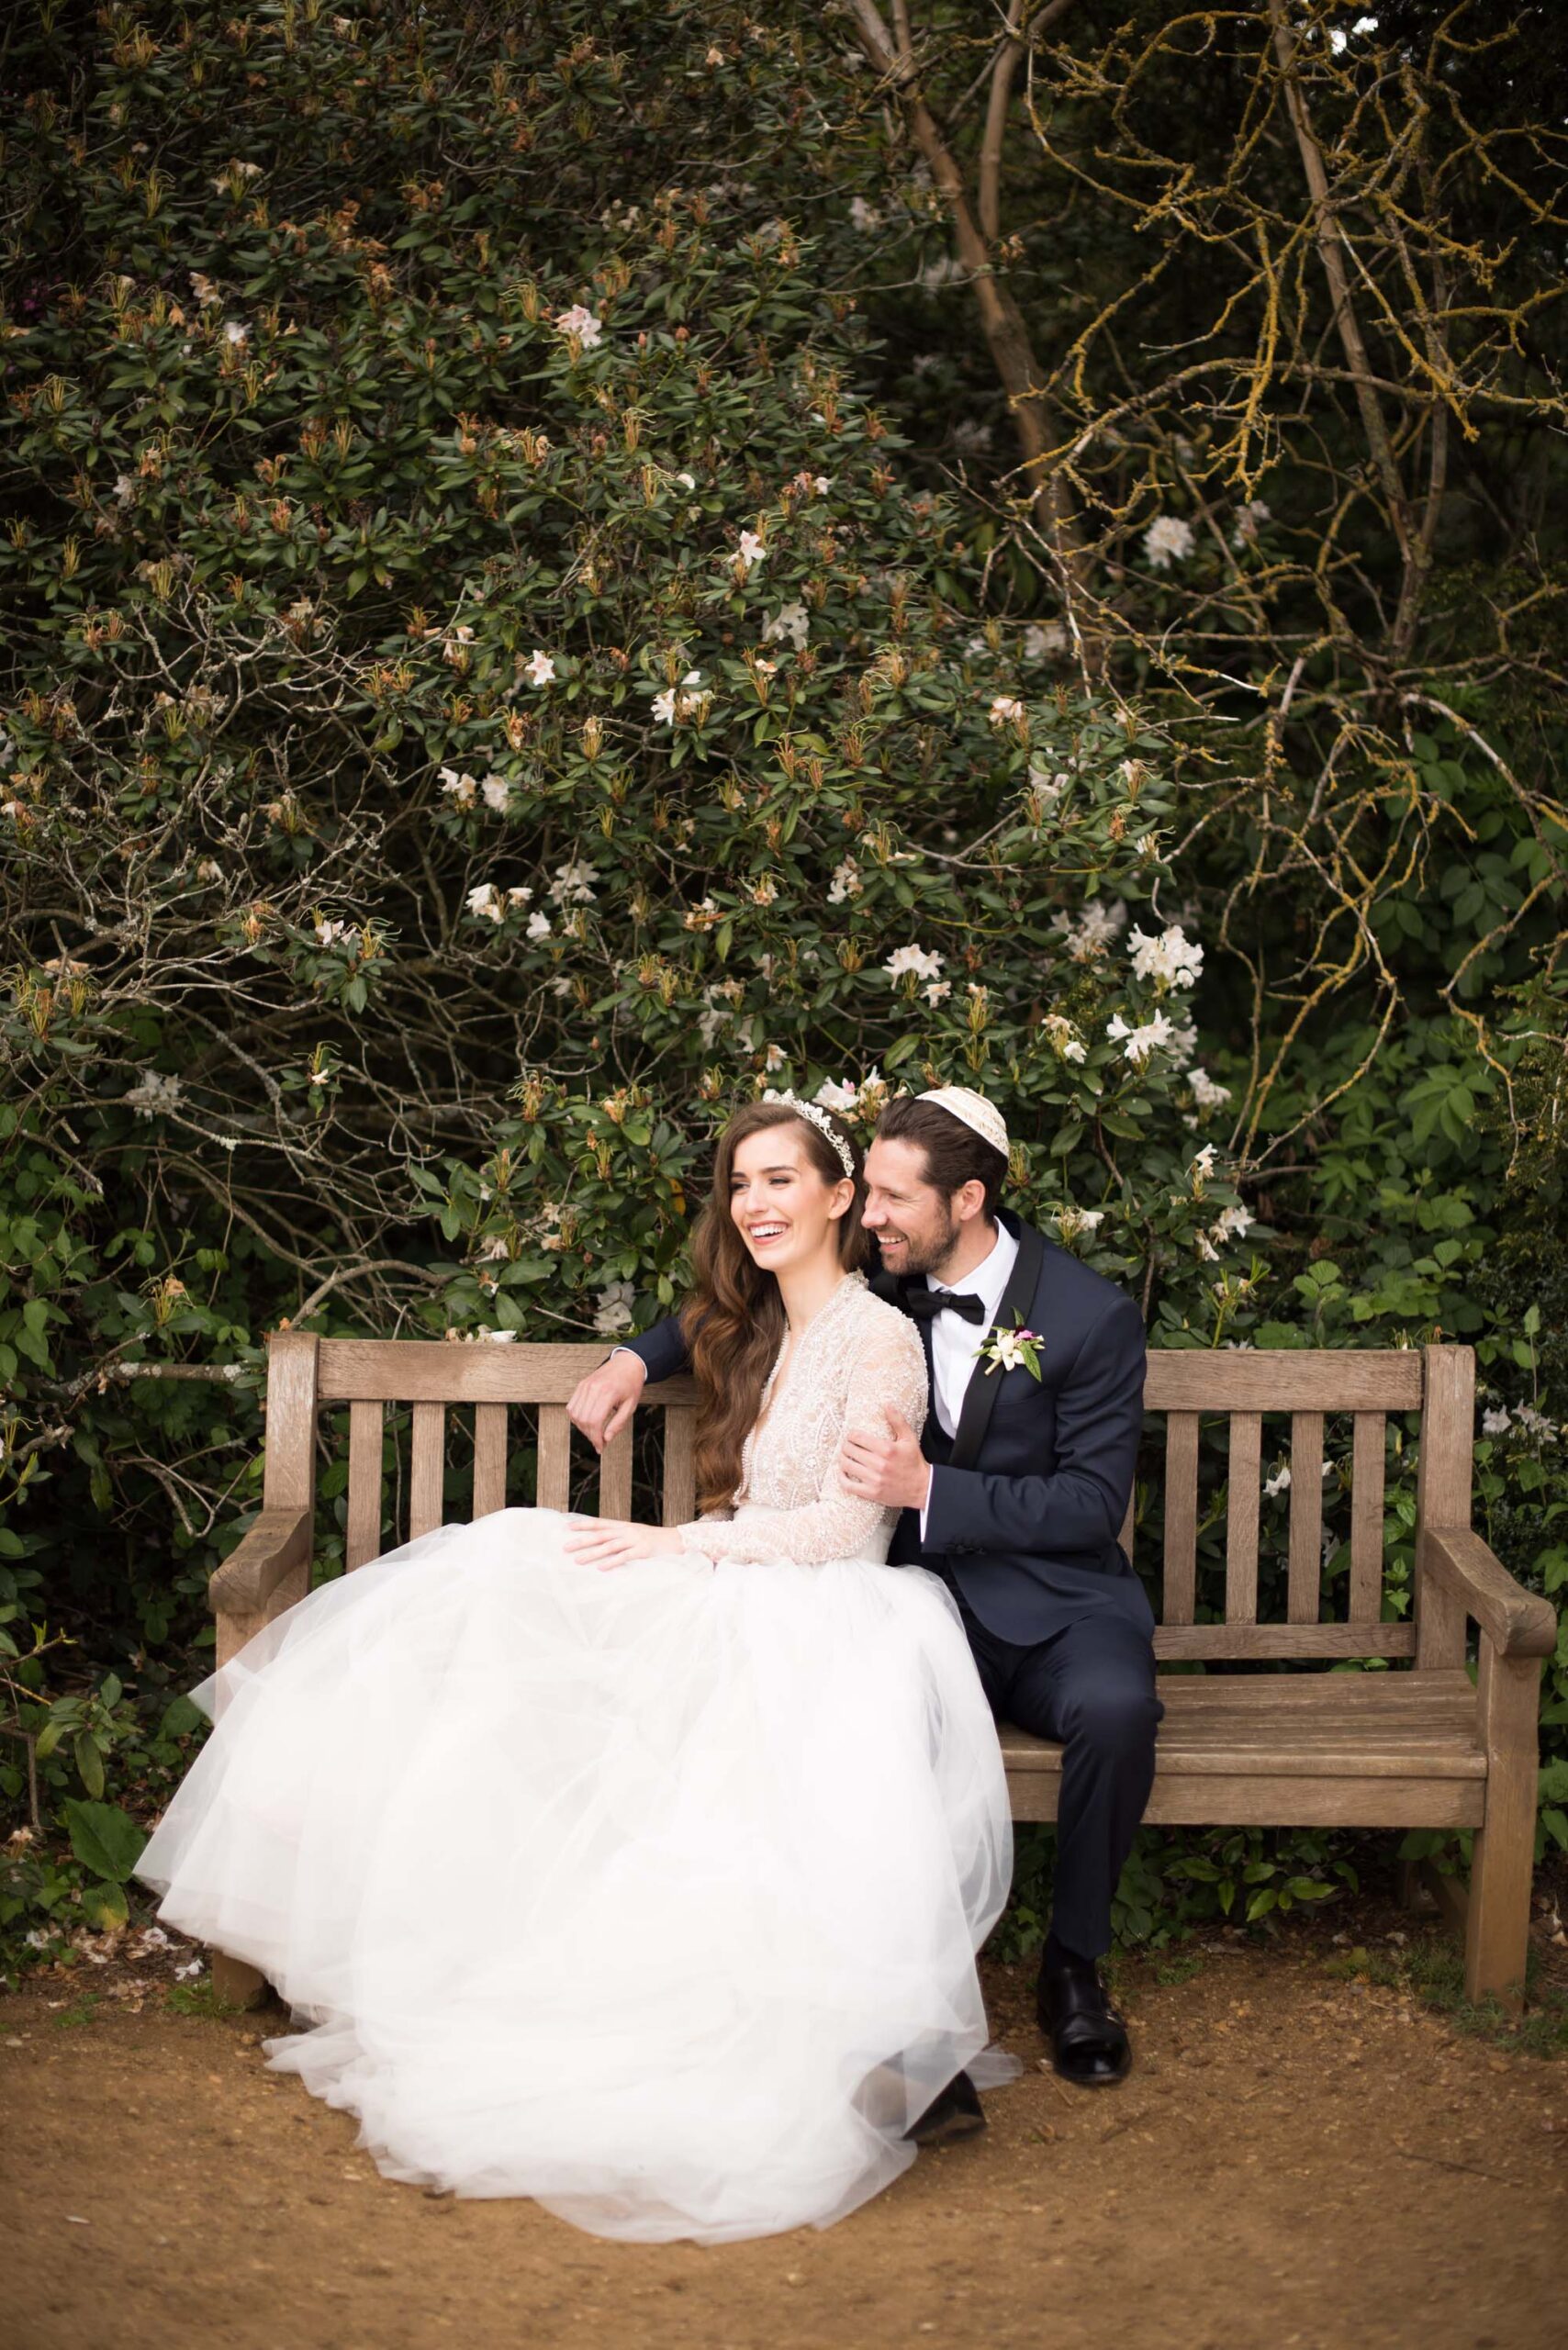 Hylands Estate country house wedding inspiration with Elegante by Michelle J, images by Claudine Hartzel Photography